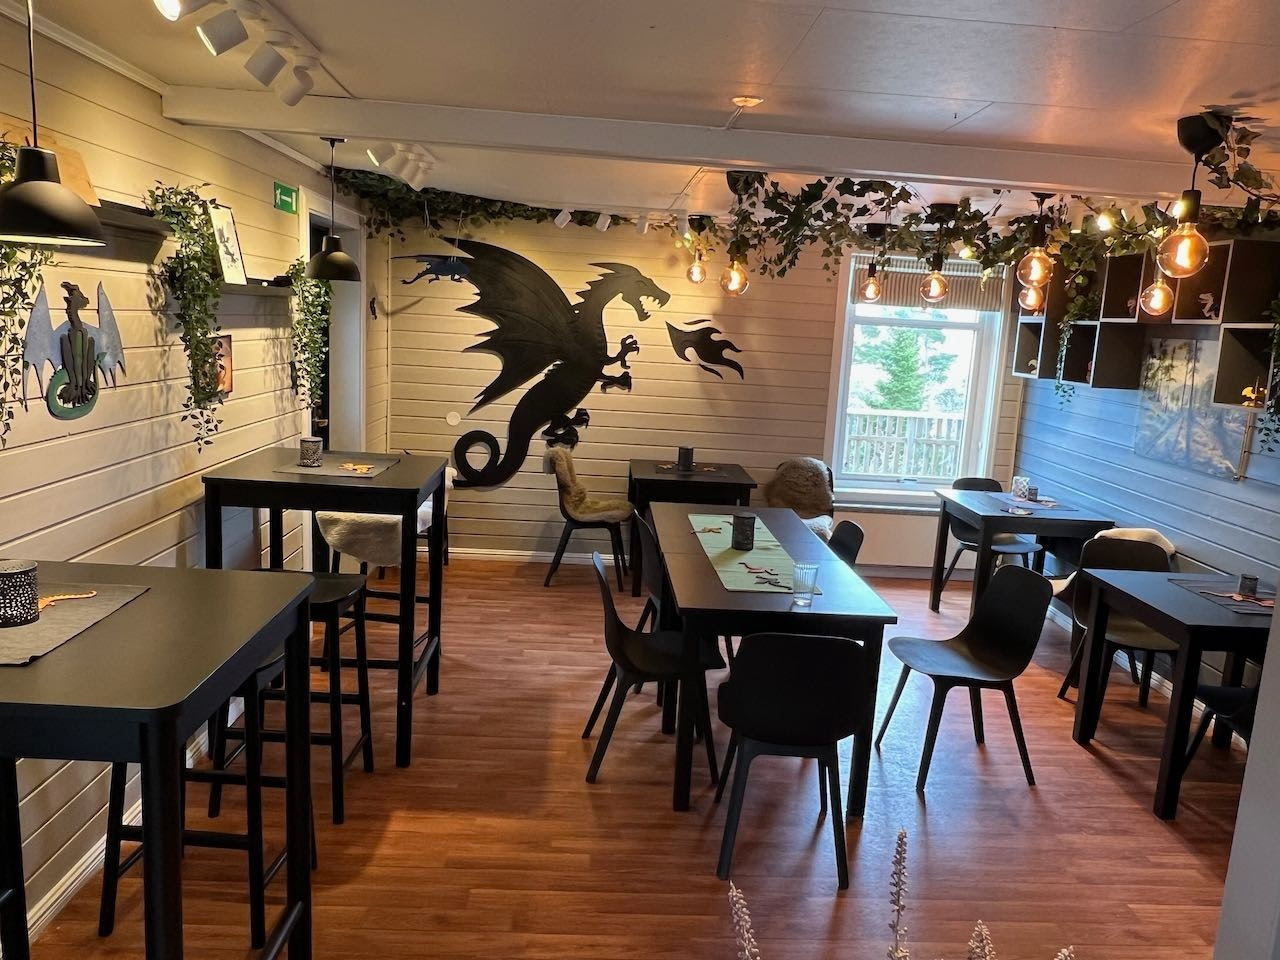 House of Dragons coffee shop and puzzleriet opens – DragonFjord